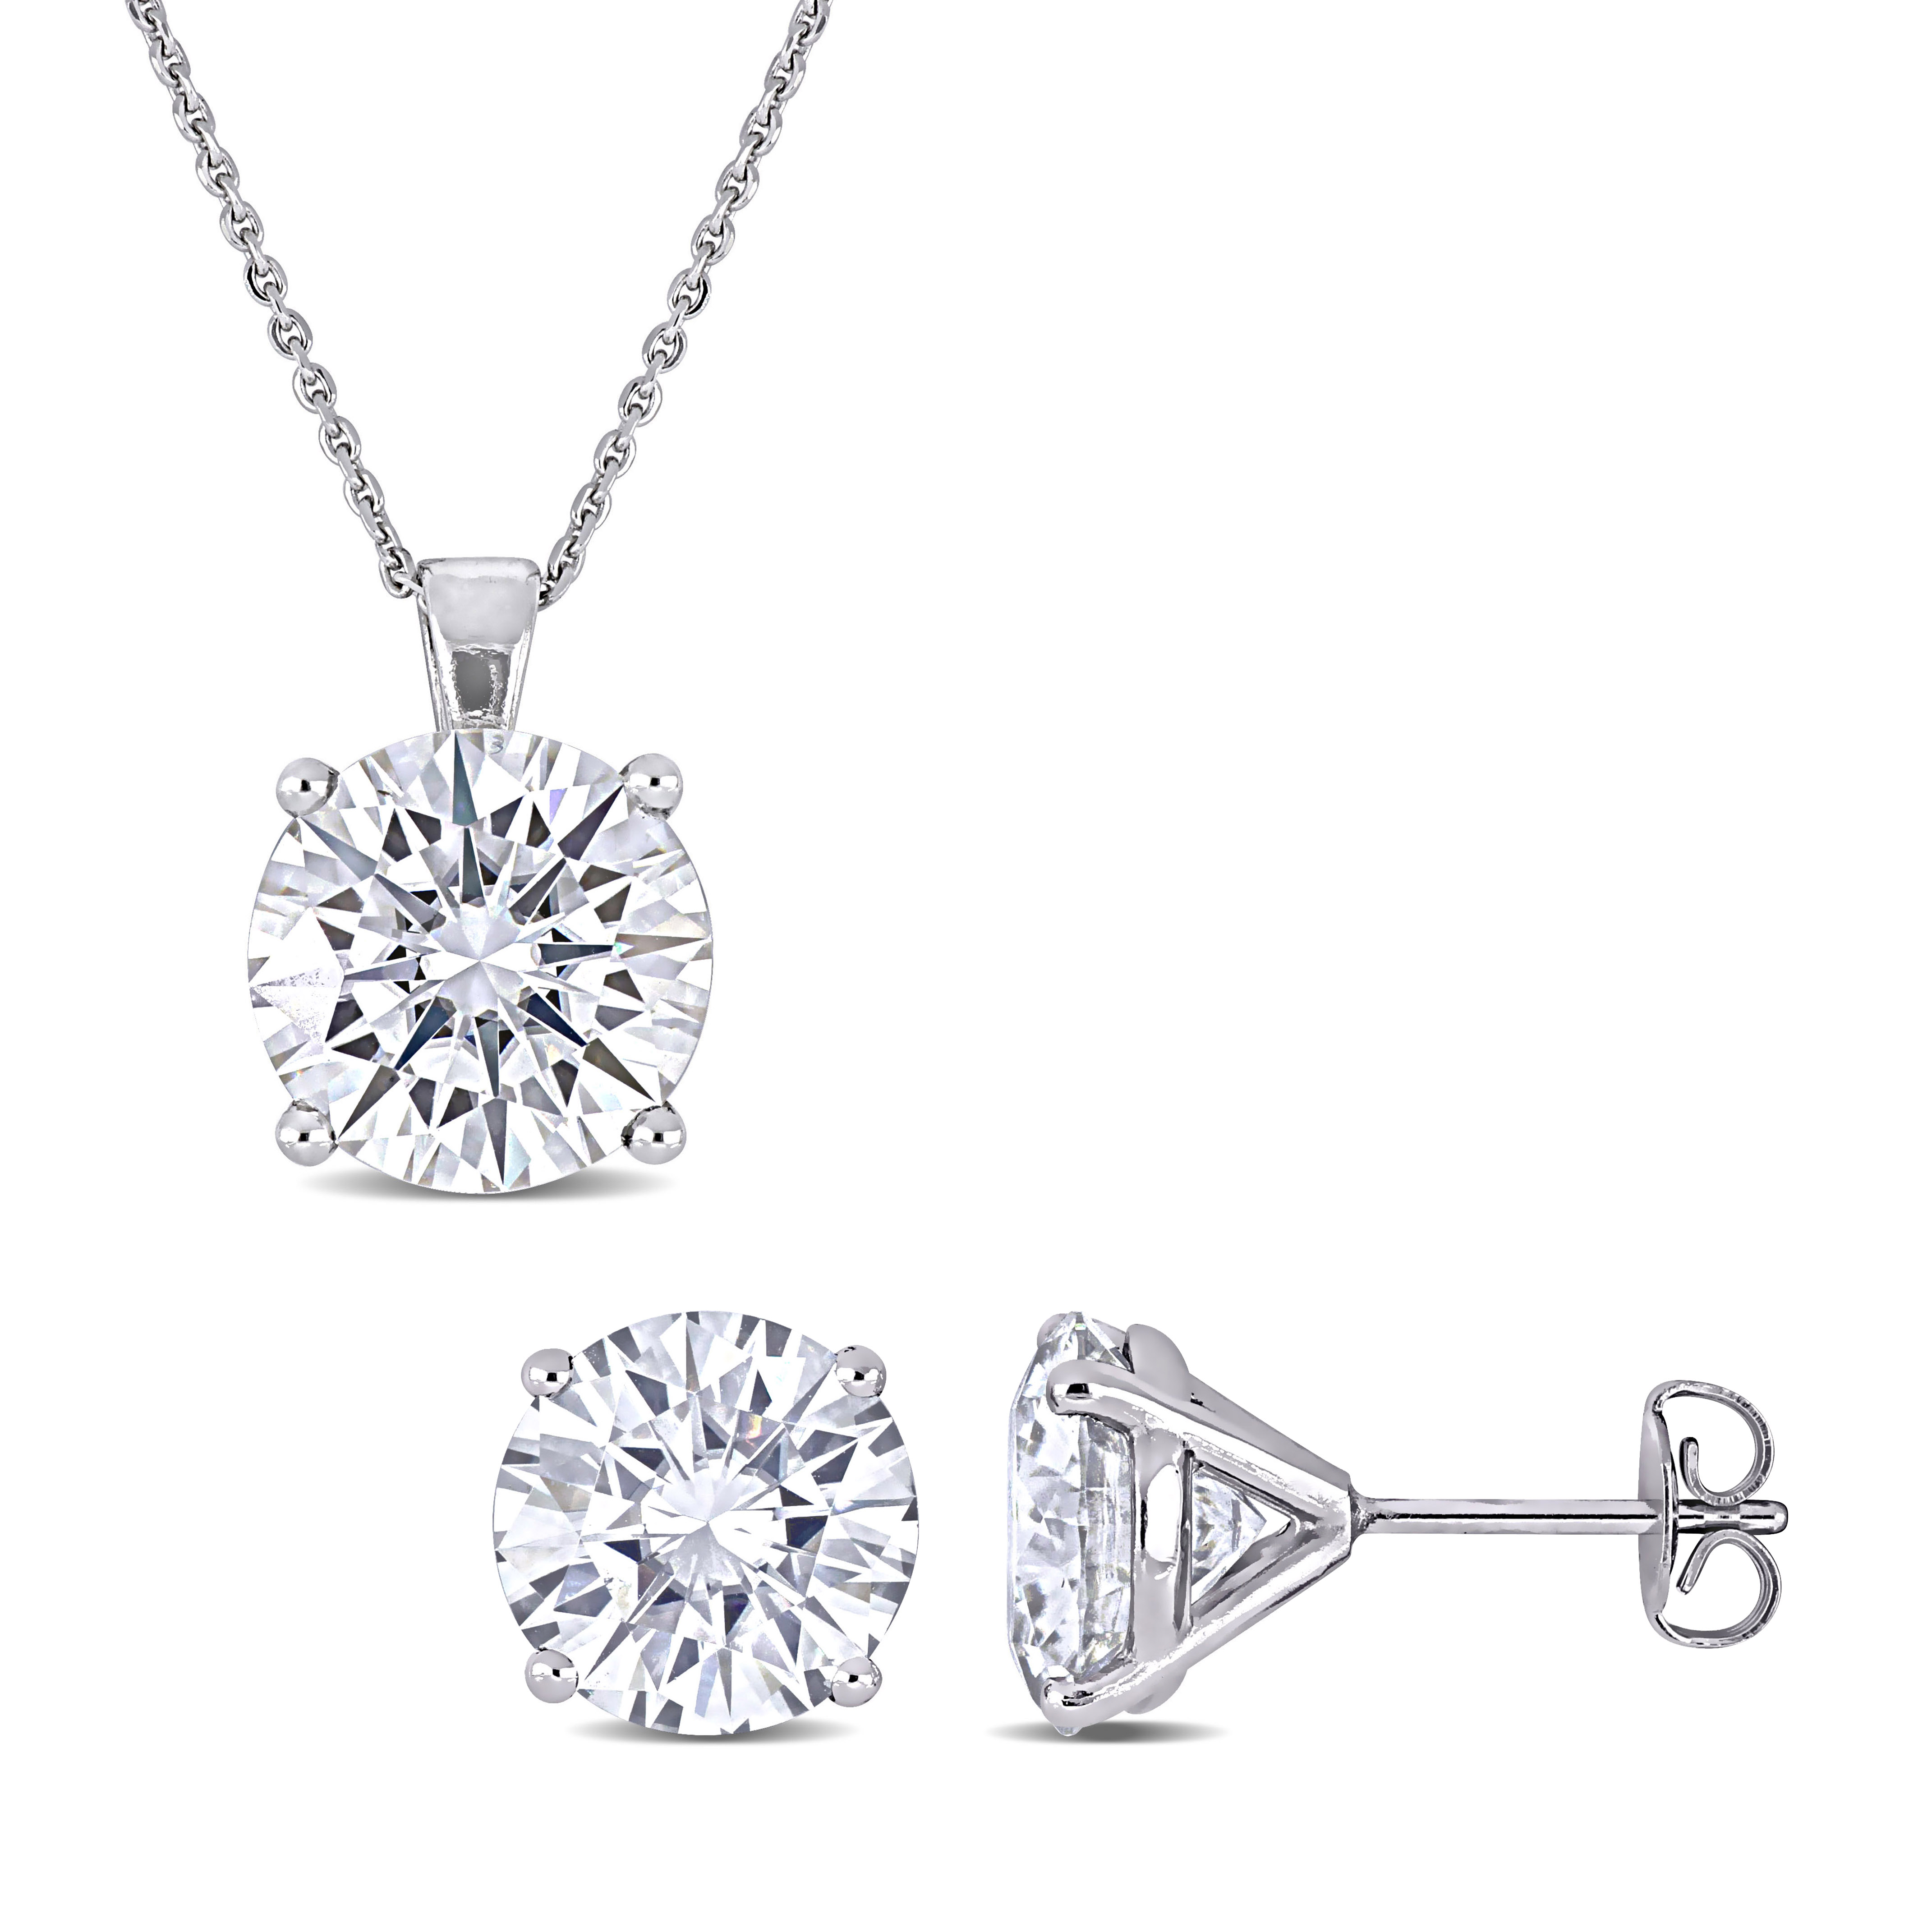 9 CT DEW Created Moissanite Stud Earrings and Pendant with Chain 2-Piece Set in 14k White Gold